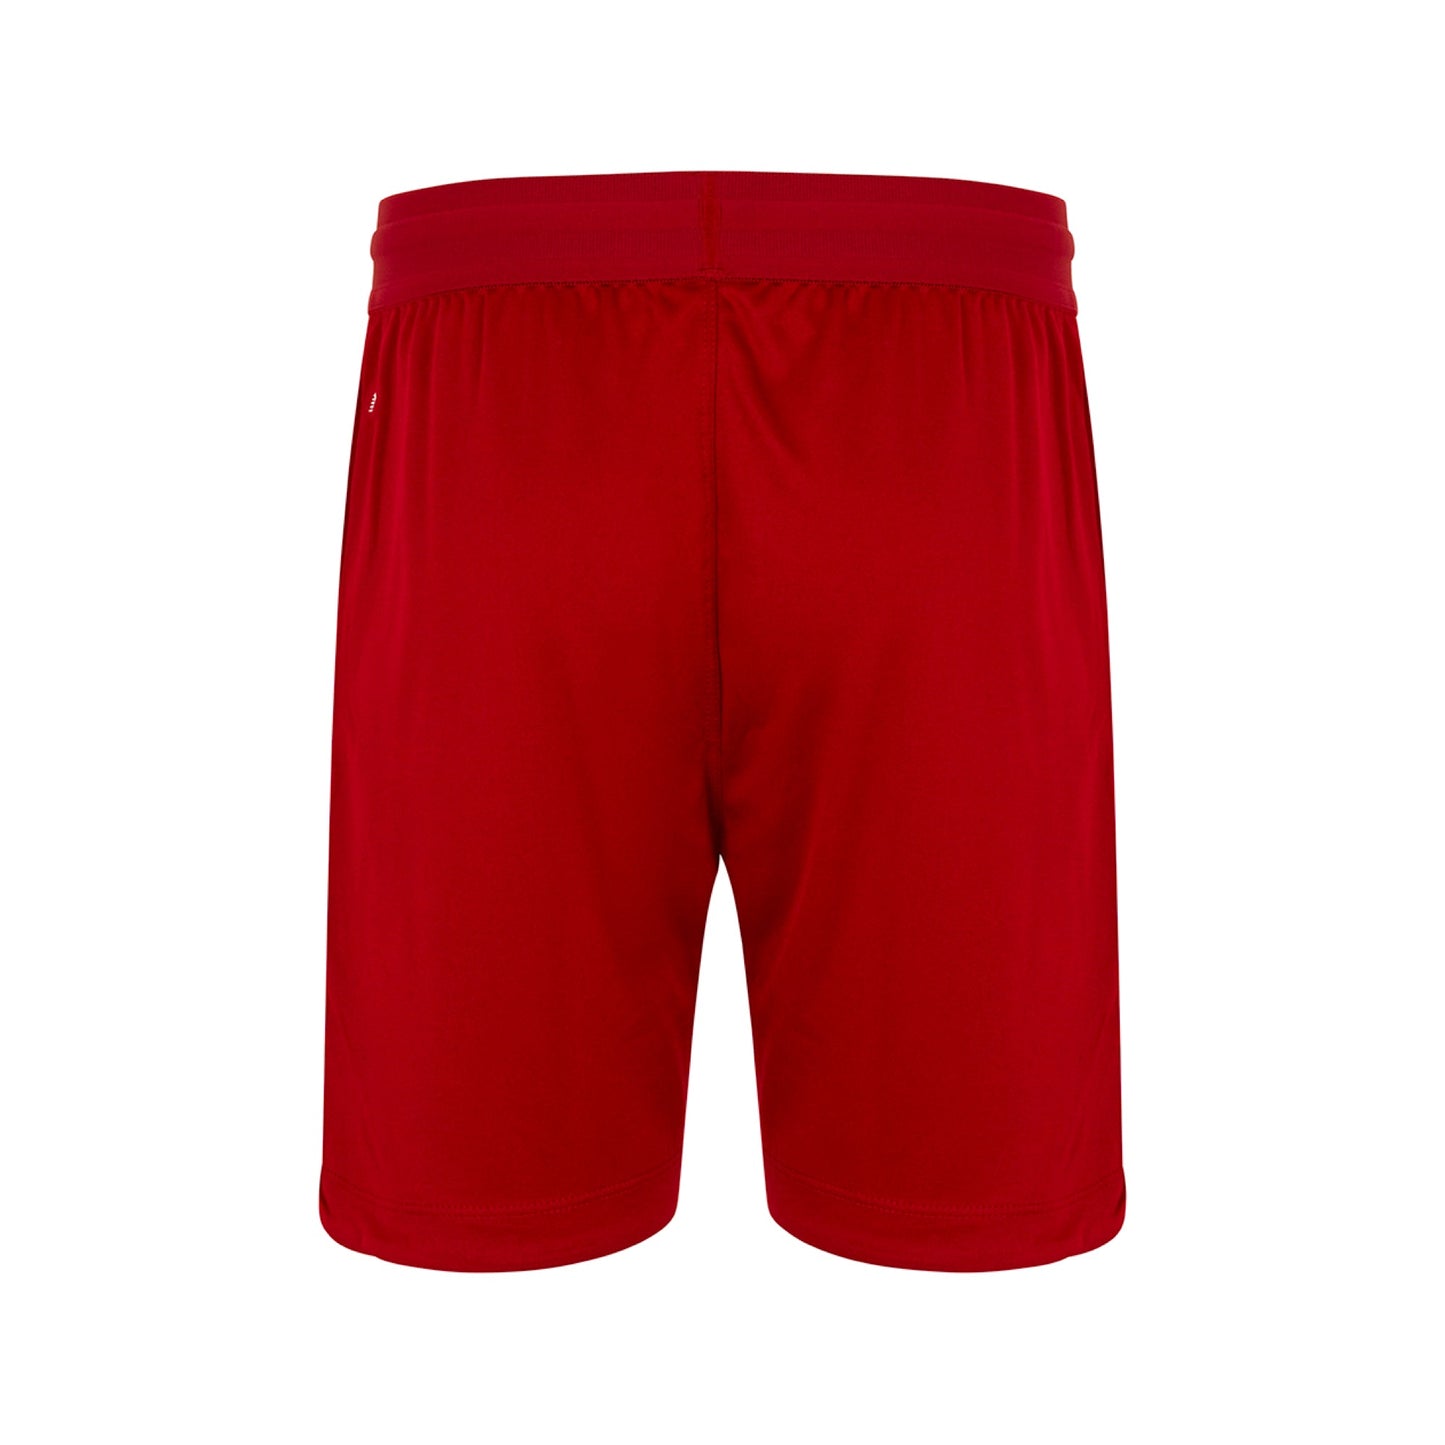 Liverpool short home 2019-20 red - Mitani Store